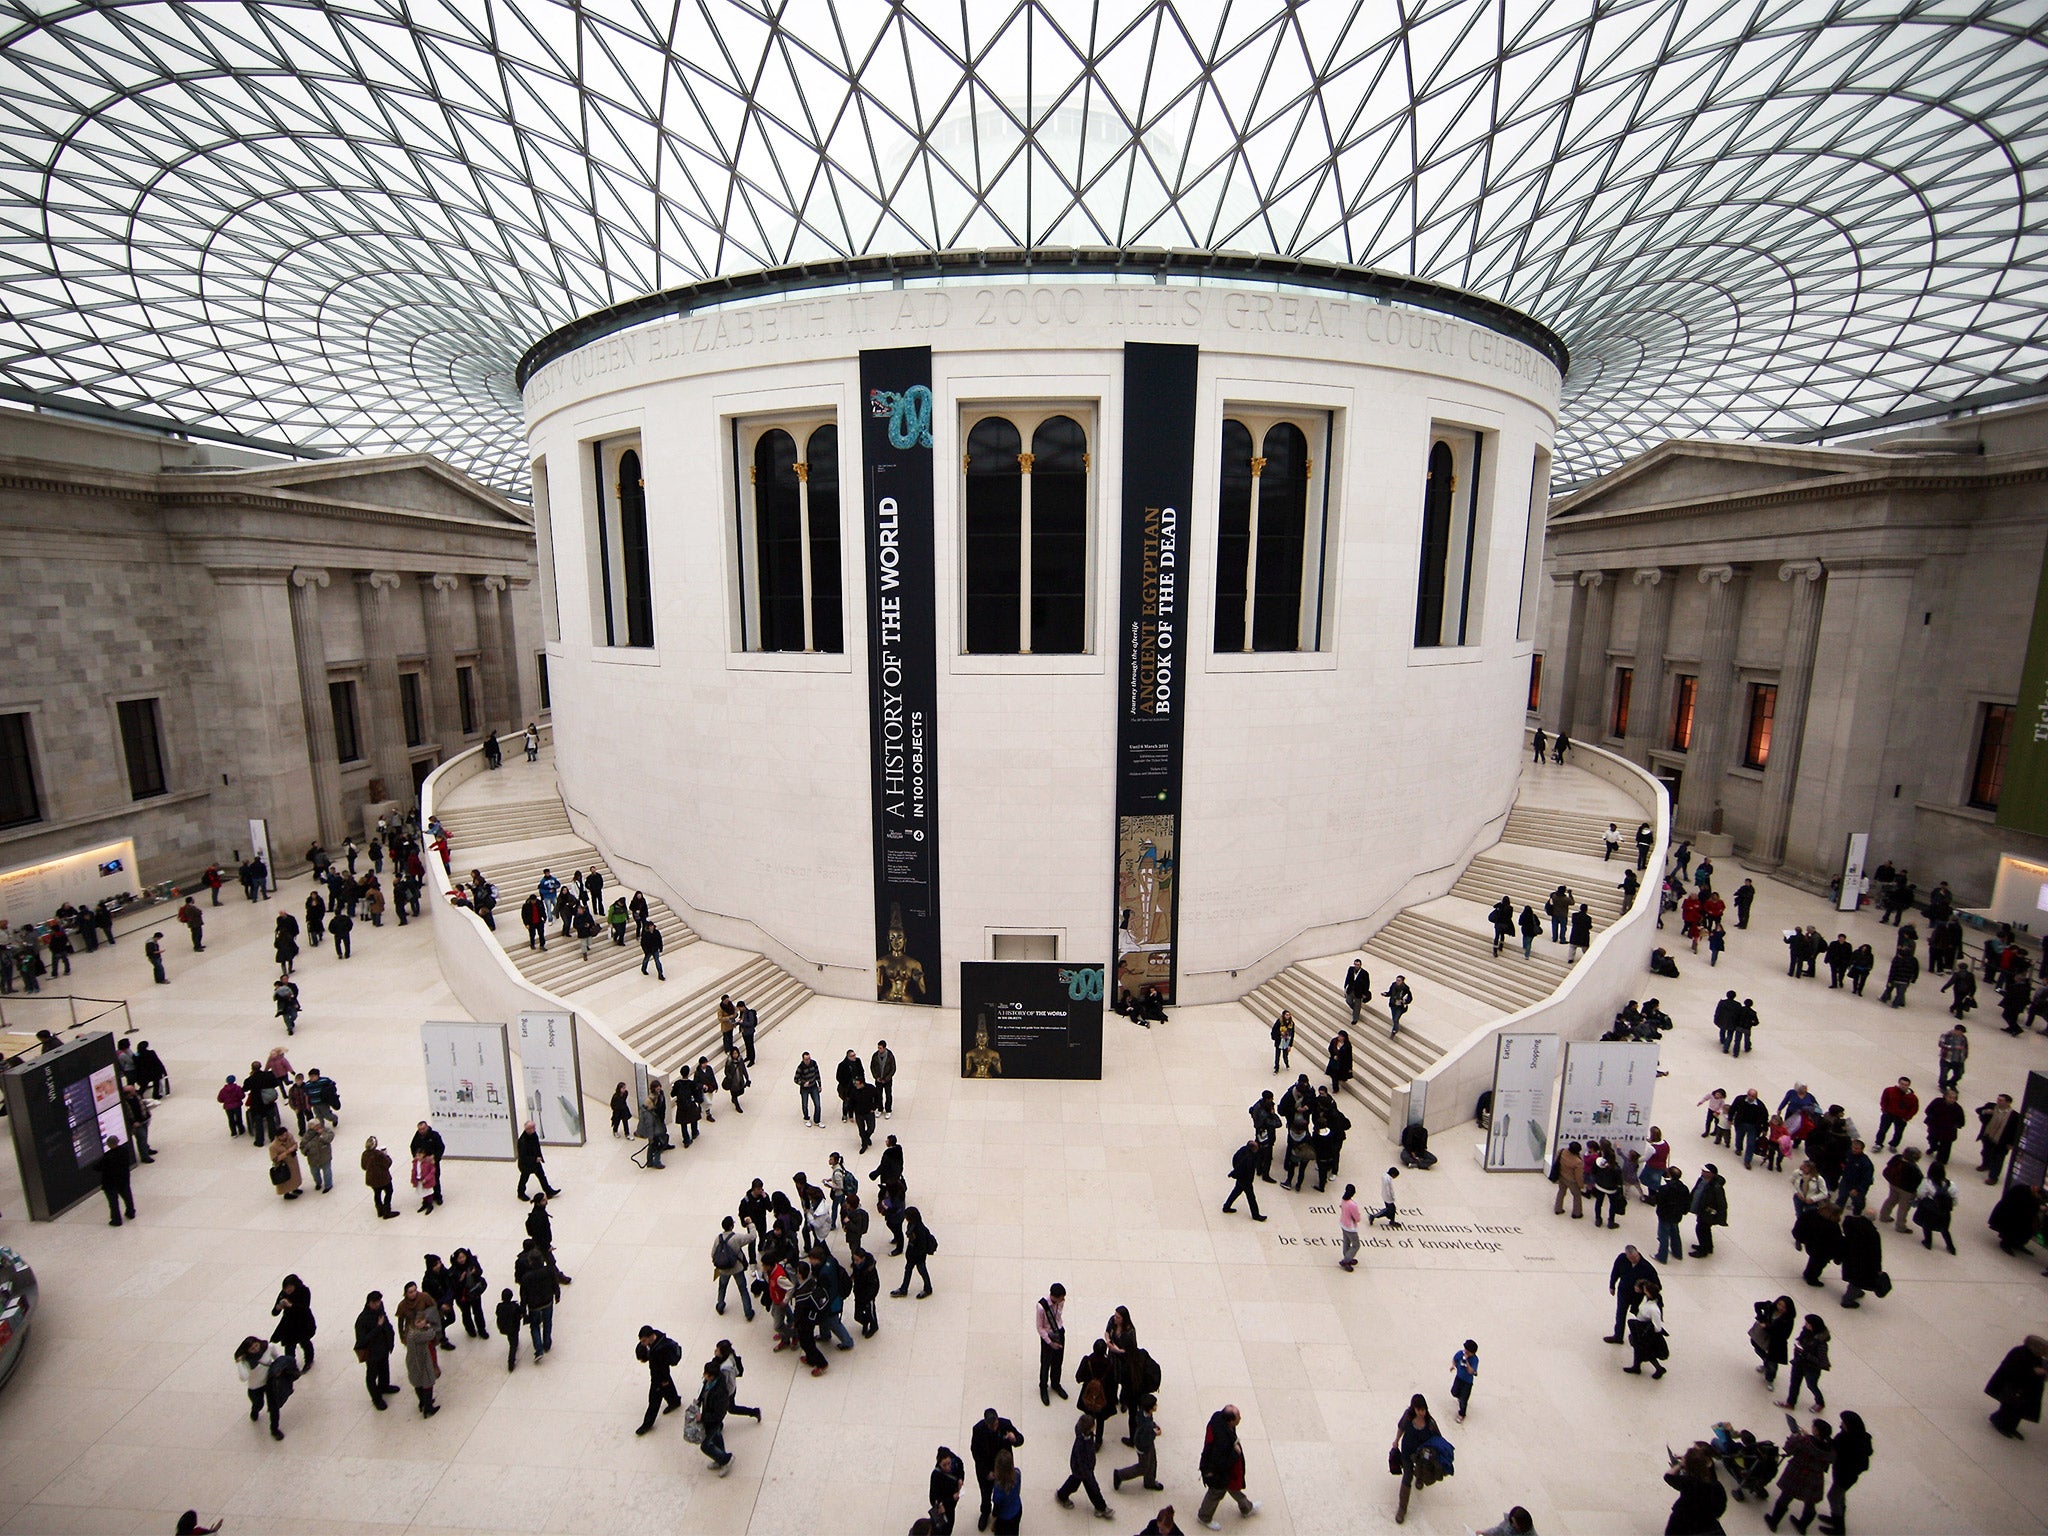 A huge rise in visitors to exhibitions at subsidised venues such as the British Museum has increased the number of wealthy charity beneficiaries